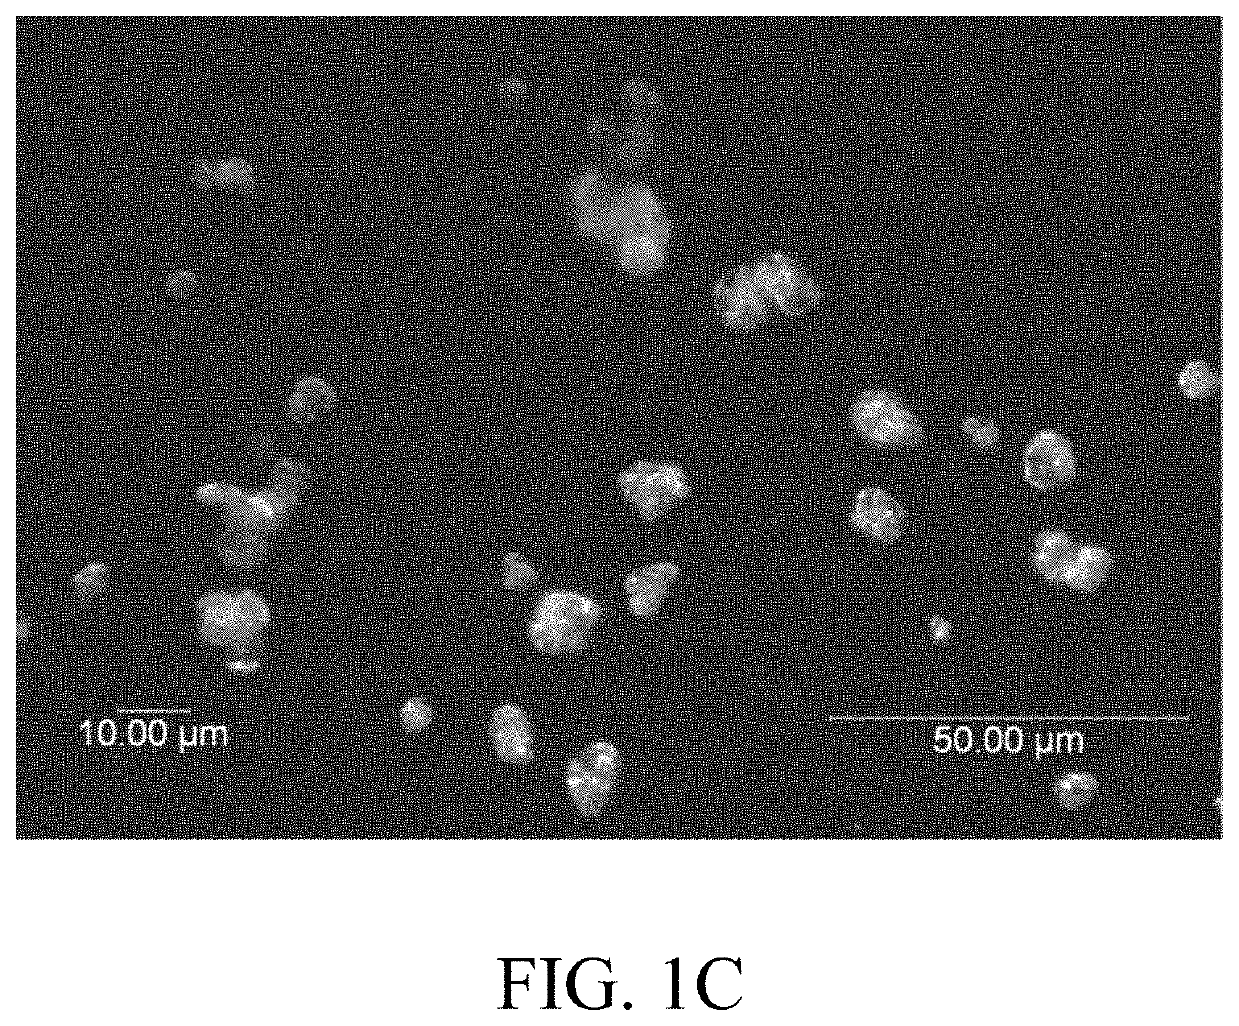 Method to improve characteristics of spray dried powders and granulated materials, and the products thereby produced